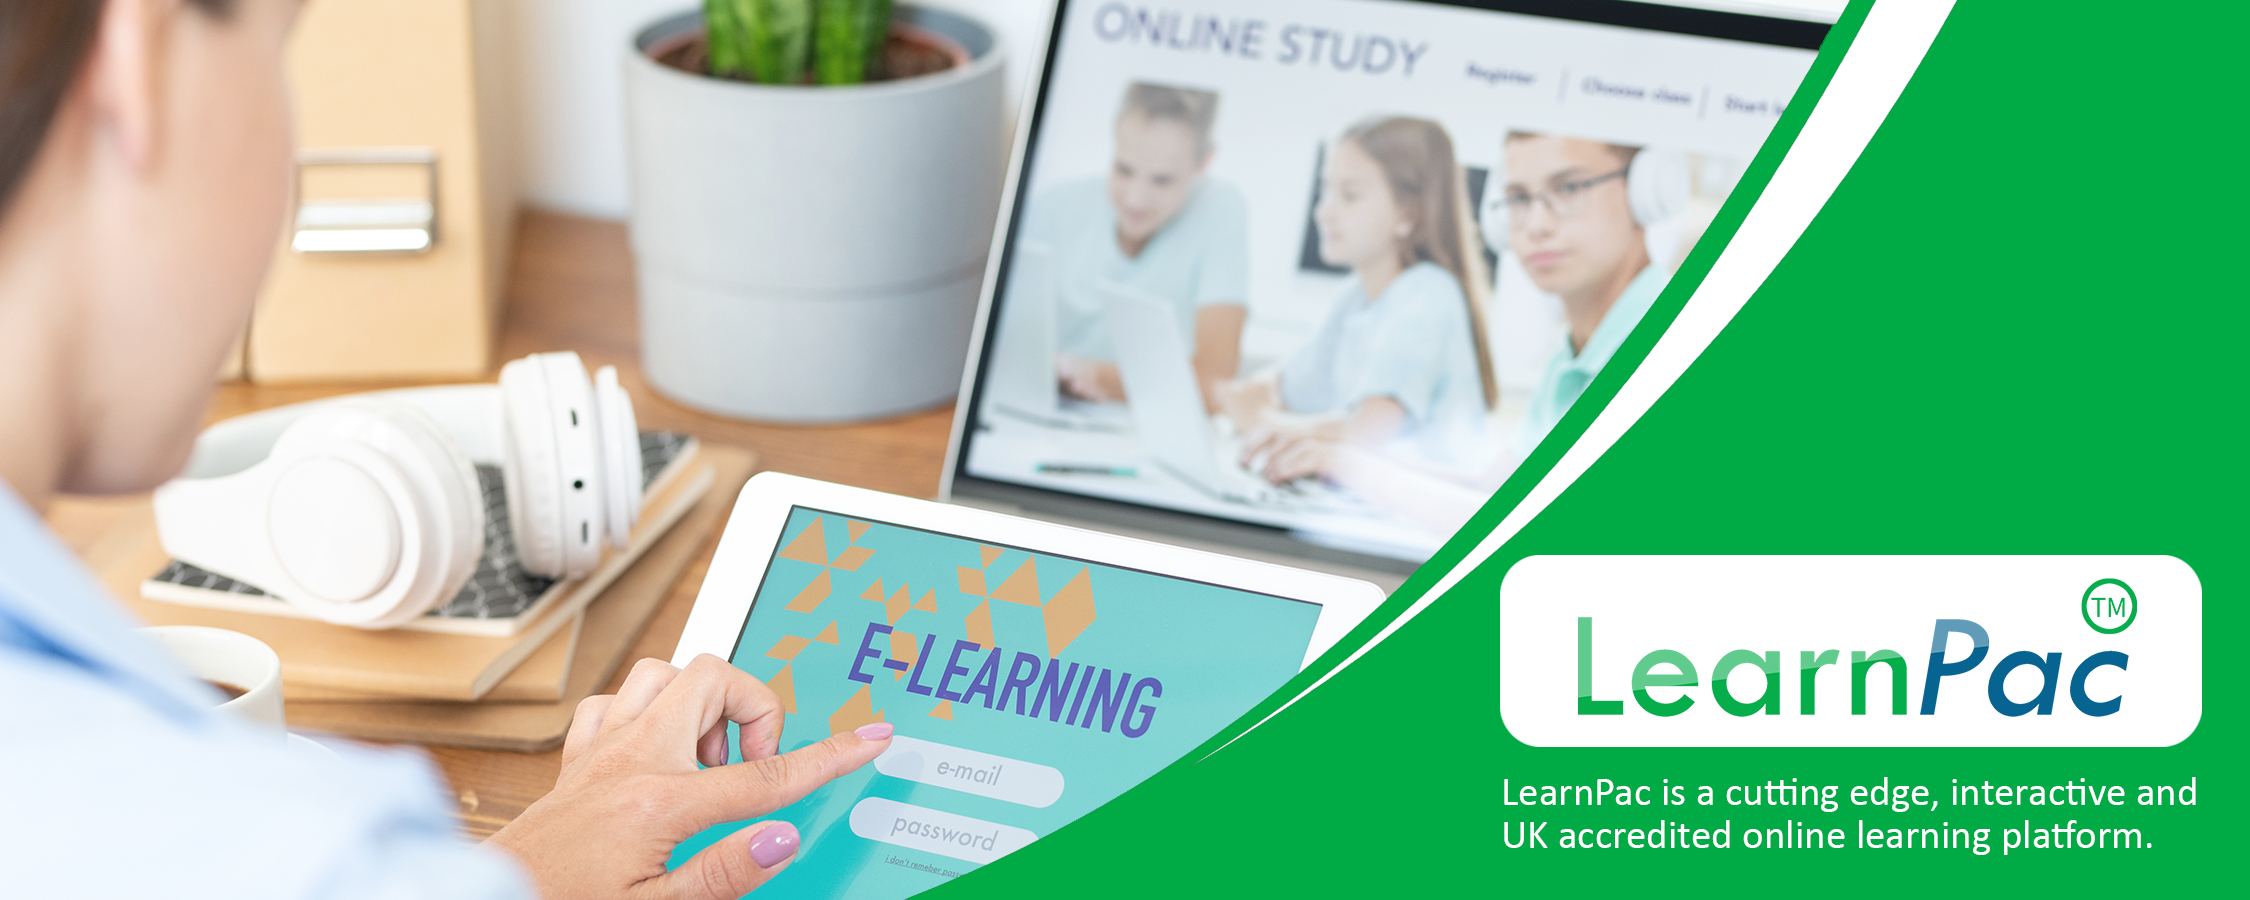 Mandatory Training for Care Home and Care Staff - Online Learning Courses - E-Learning Courses - LearnPac Systems UK -